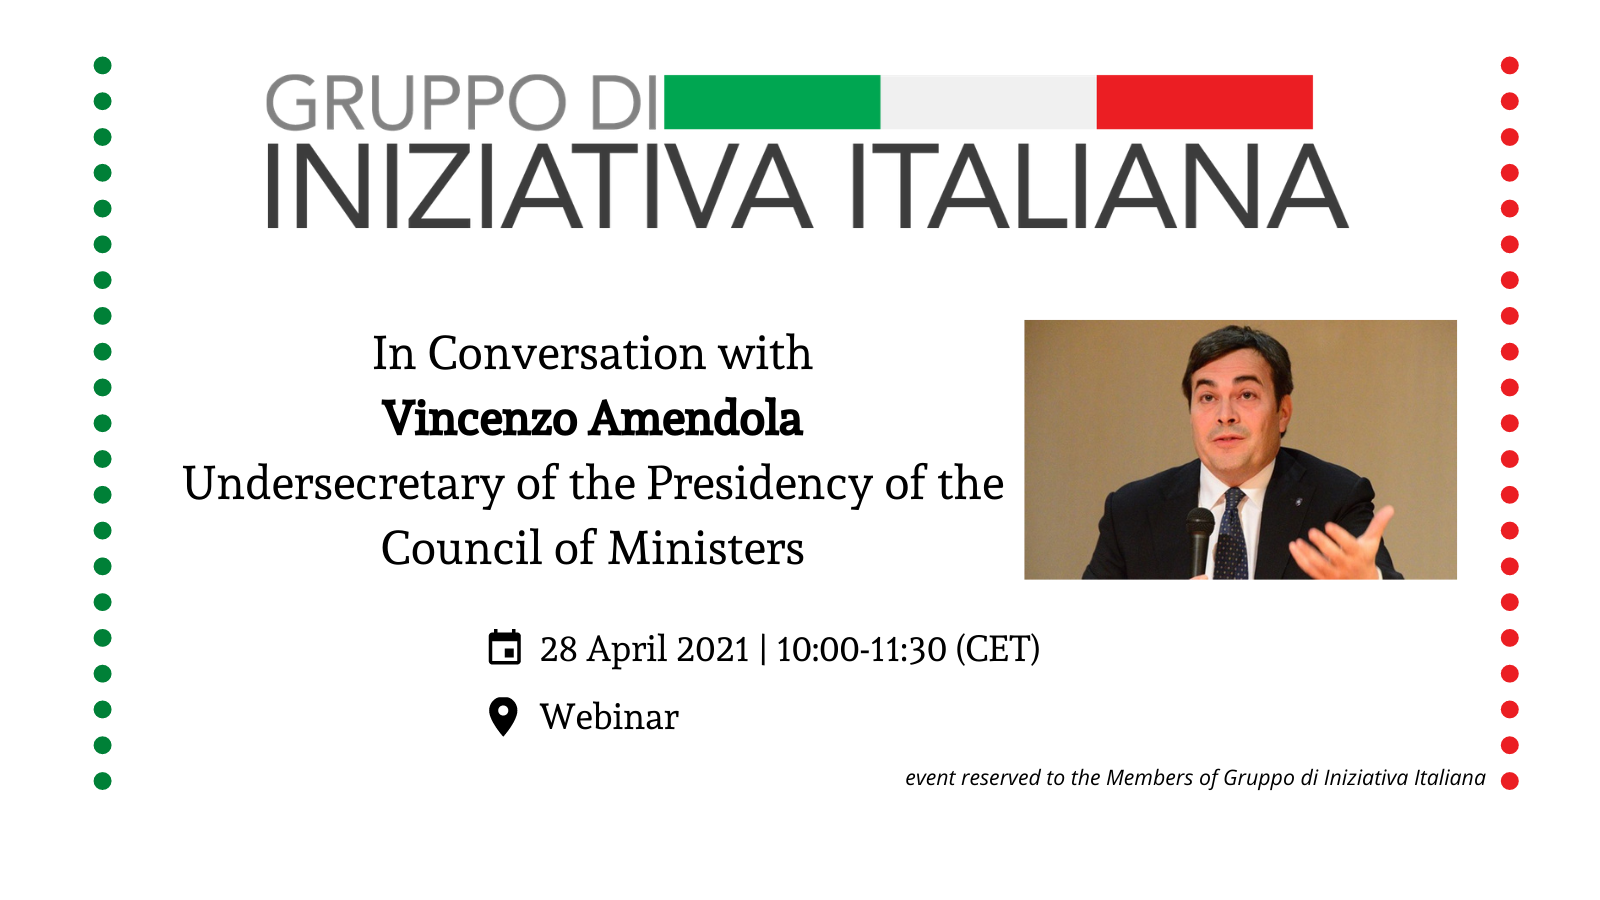 In Conversation with Vincenzo Amendola|Undersecretary of the Presidency of the Council of Ministers